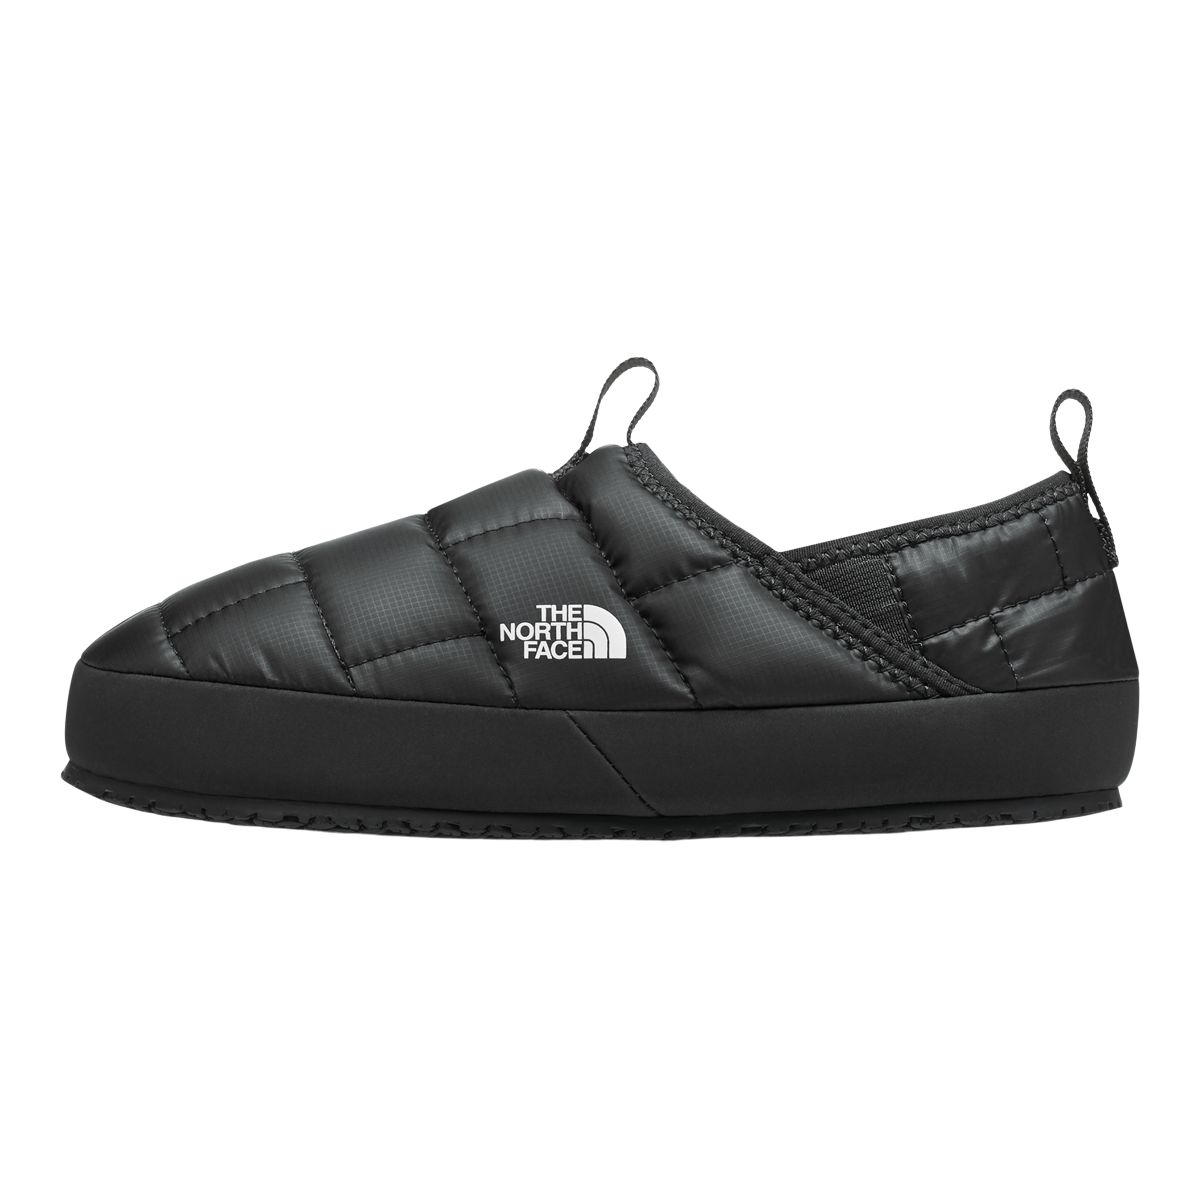 Image of The North Face Kids' Thermoball Traction Mule II Shoes